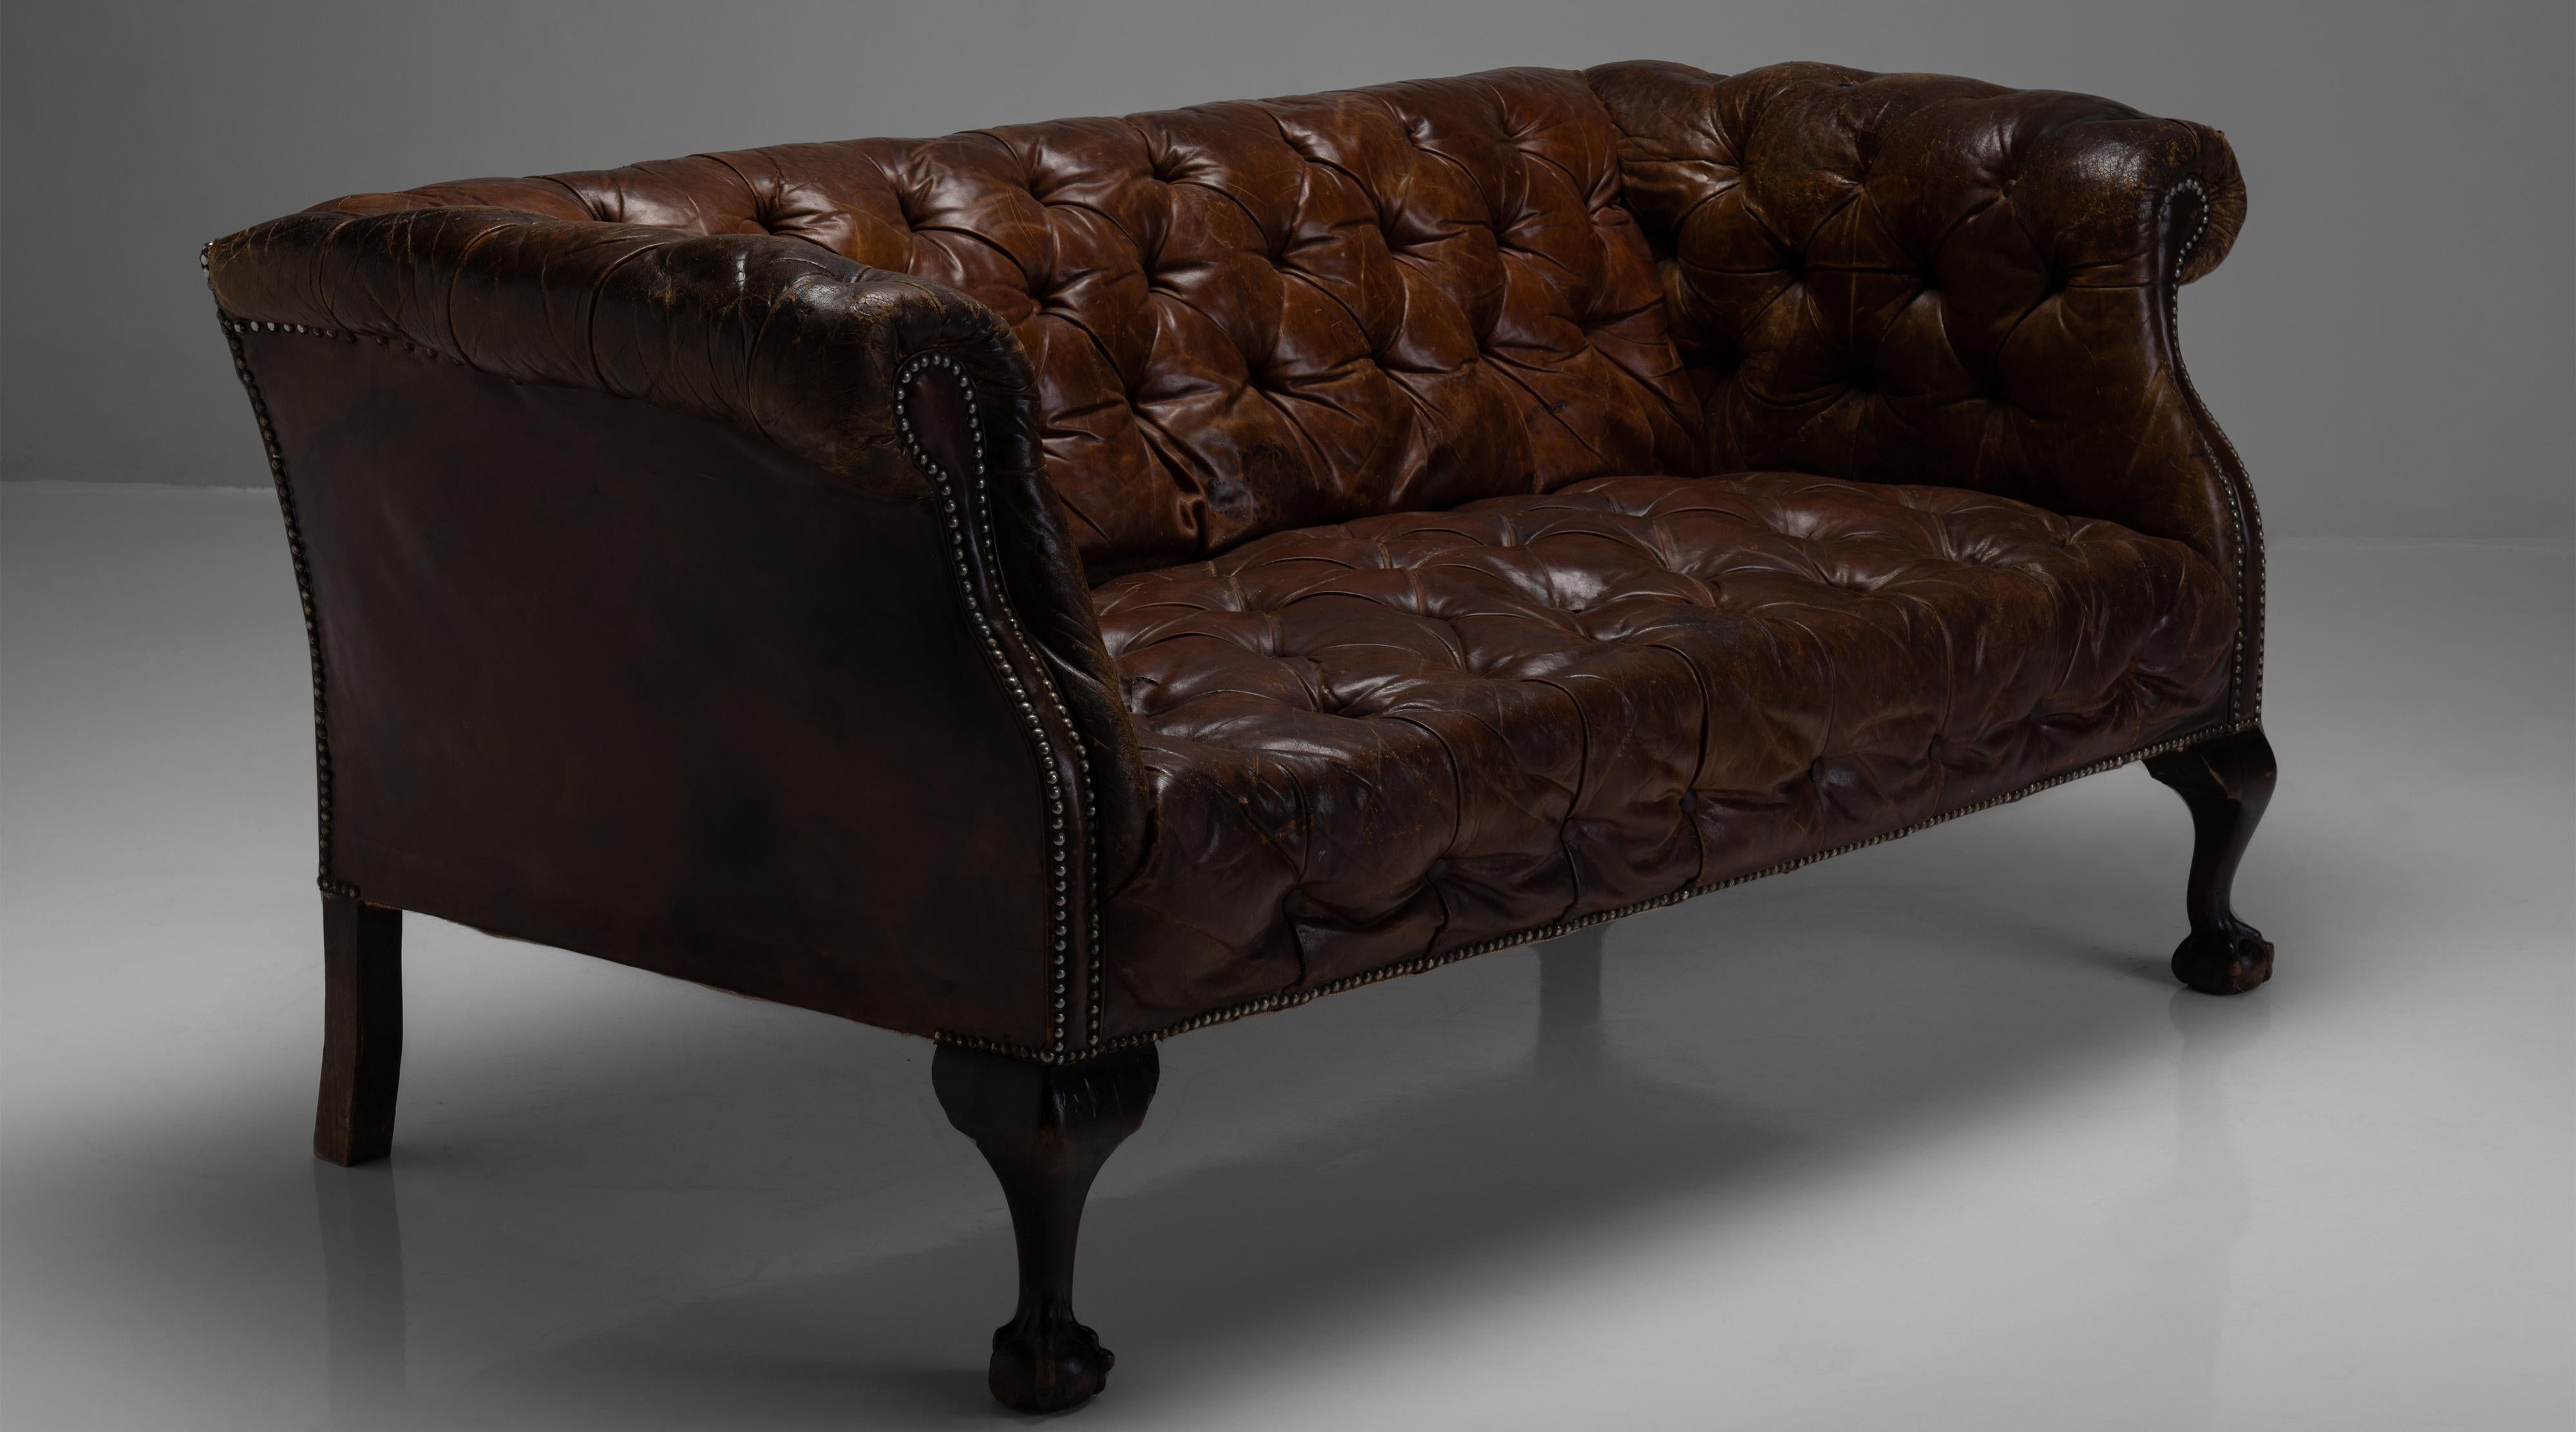 Leather Chesterfield Two Seater Sofa

England, Circa 1900

Buttoned sofa with original leather upholstery on ball and claw legs.